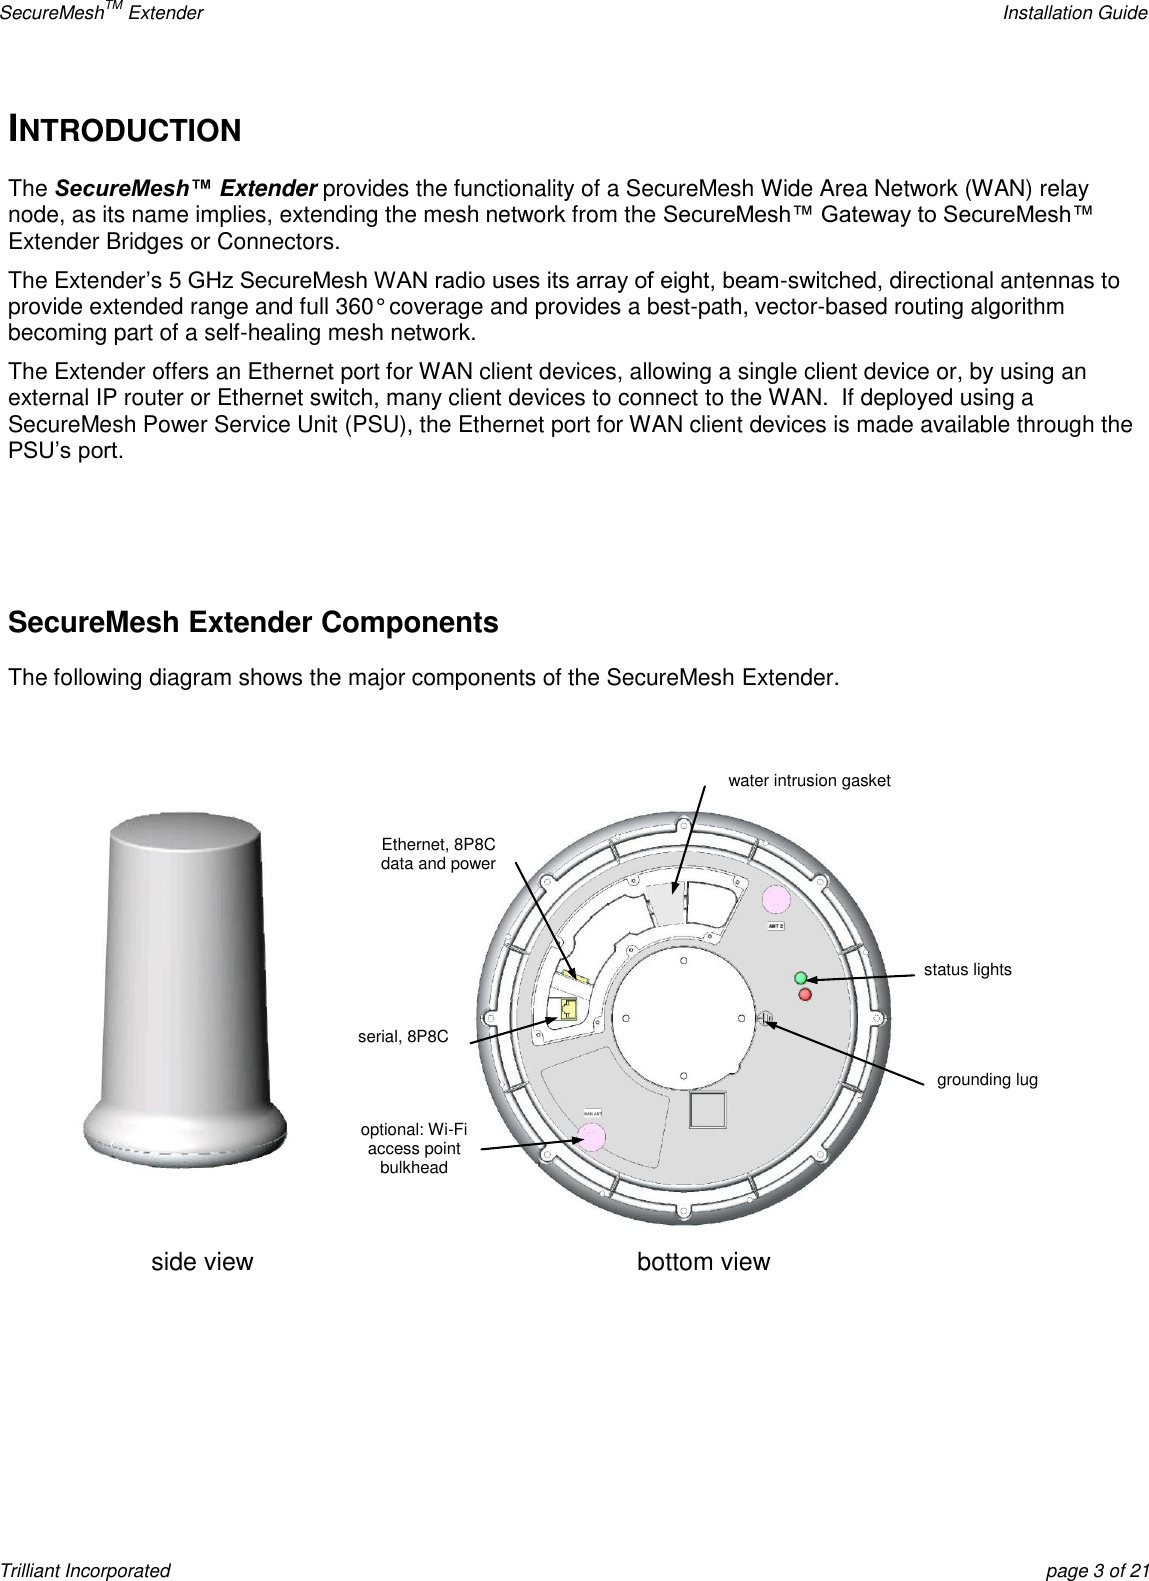 SecureMeshTM Extender    Installation Guide Trilliant Incorporated  page 3 of 21 INTRODUCTION The SecureMesh™ Extender provides the functionality of a SecureMesh Wide Area Network (WAN) relay node, as its name implies, extending the mesh network from the SecureMesh™ Gateway to SecureMesh™ Extender Bridges or Connectors.   The Extender’s 5 GHz SecureMesh WAN radio uses its array of eight, beam-switched, directional antennas to provide extended range and full 360° coverage and provides a best-path, vector-based routing algorithm becoming part of a self-healing mesh network. The Extender offers an Ethernet port for WAN client devices, allowing a single client device or, by using an external IP router or Ethernet switch, many client devices to connect to the WAN.  If deployed using a SecureMesh Power Service Unit (PSU), the Ethernet port for WAN client devices is made available through the PSU’s port.      SecureMesh Extender Components The following diagram shows the major components of the SecureMesh Extender.   side view bottom view Ethernet, 8P8C data and power serial, 8P8C optional: Wi-Fi access point bulkhead connector  water intrusion gasket status lights grounding lug 